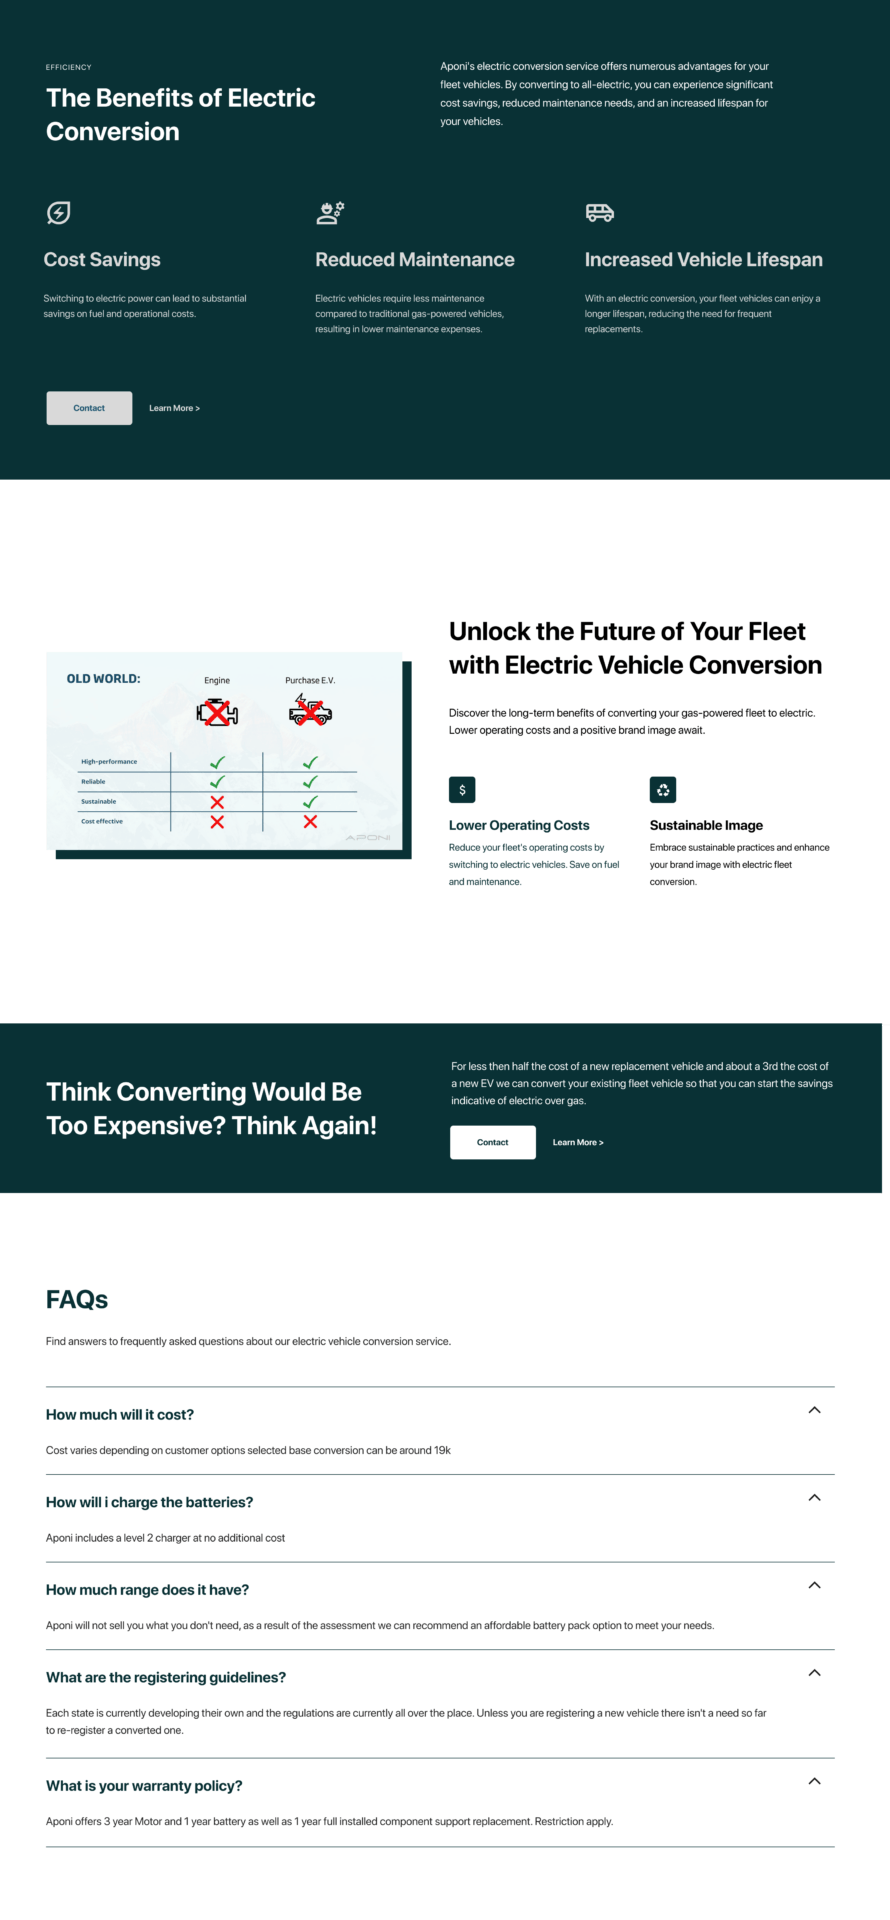 The homepage of a website with a green background.